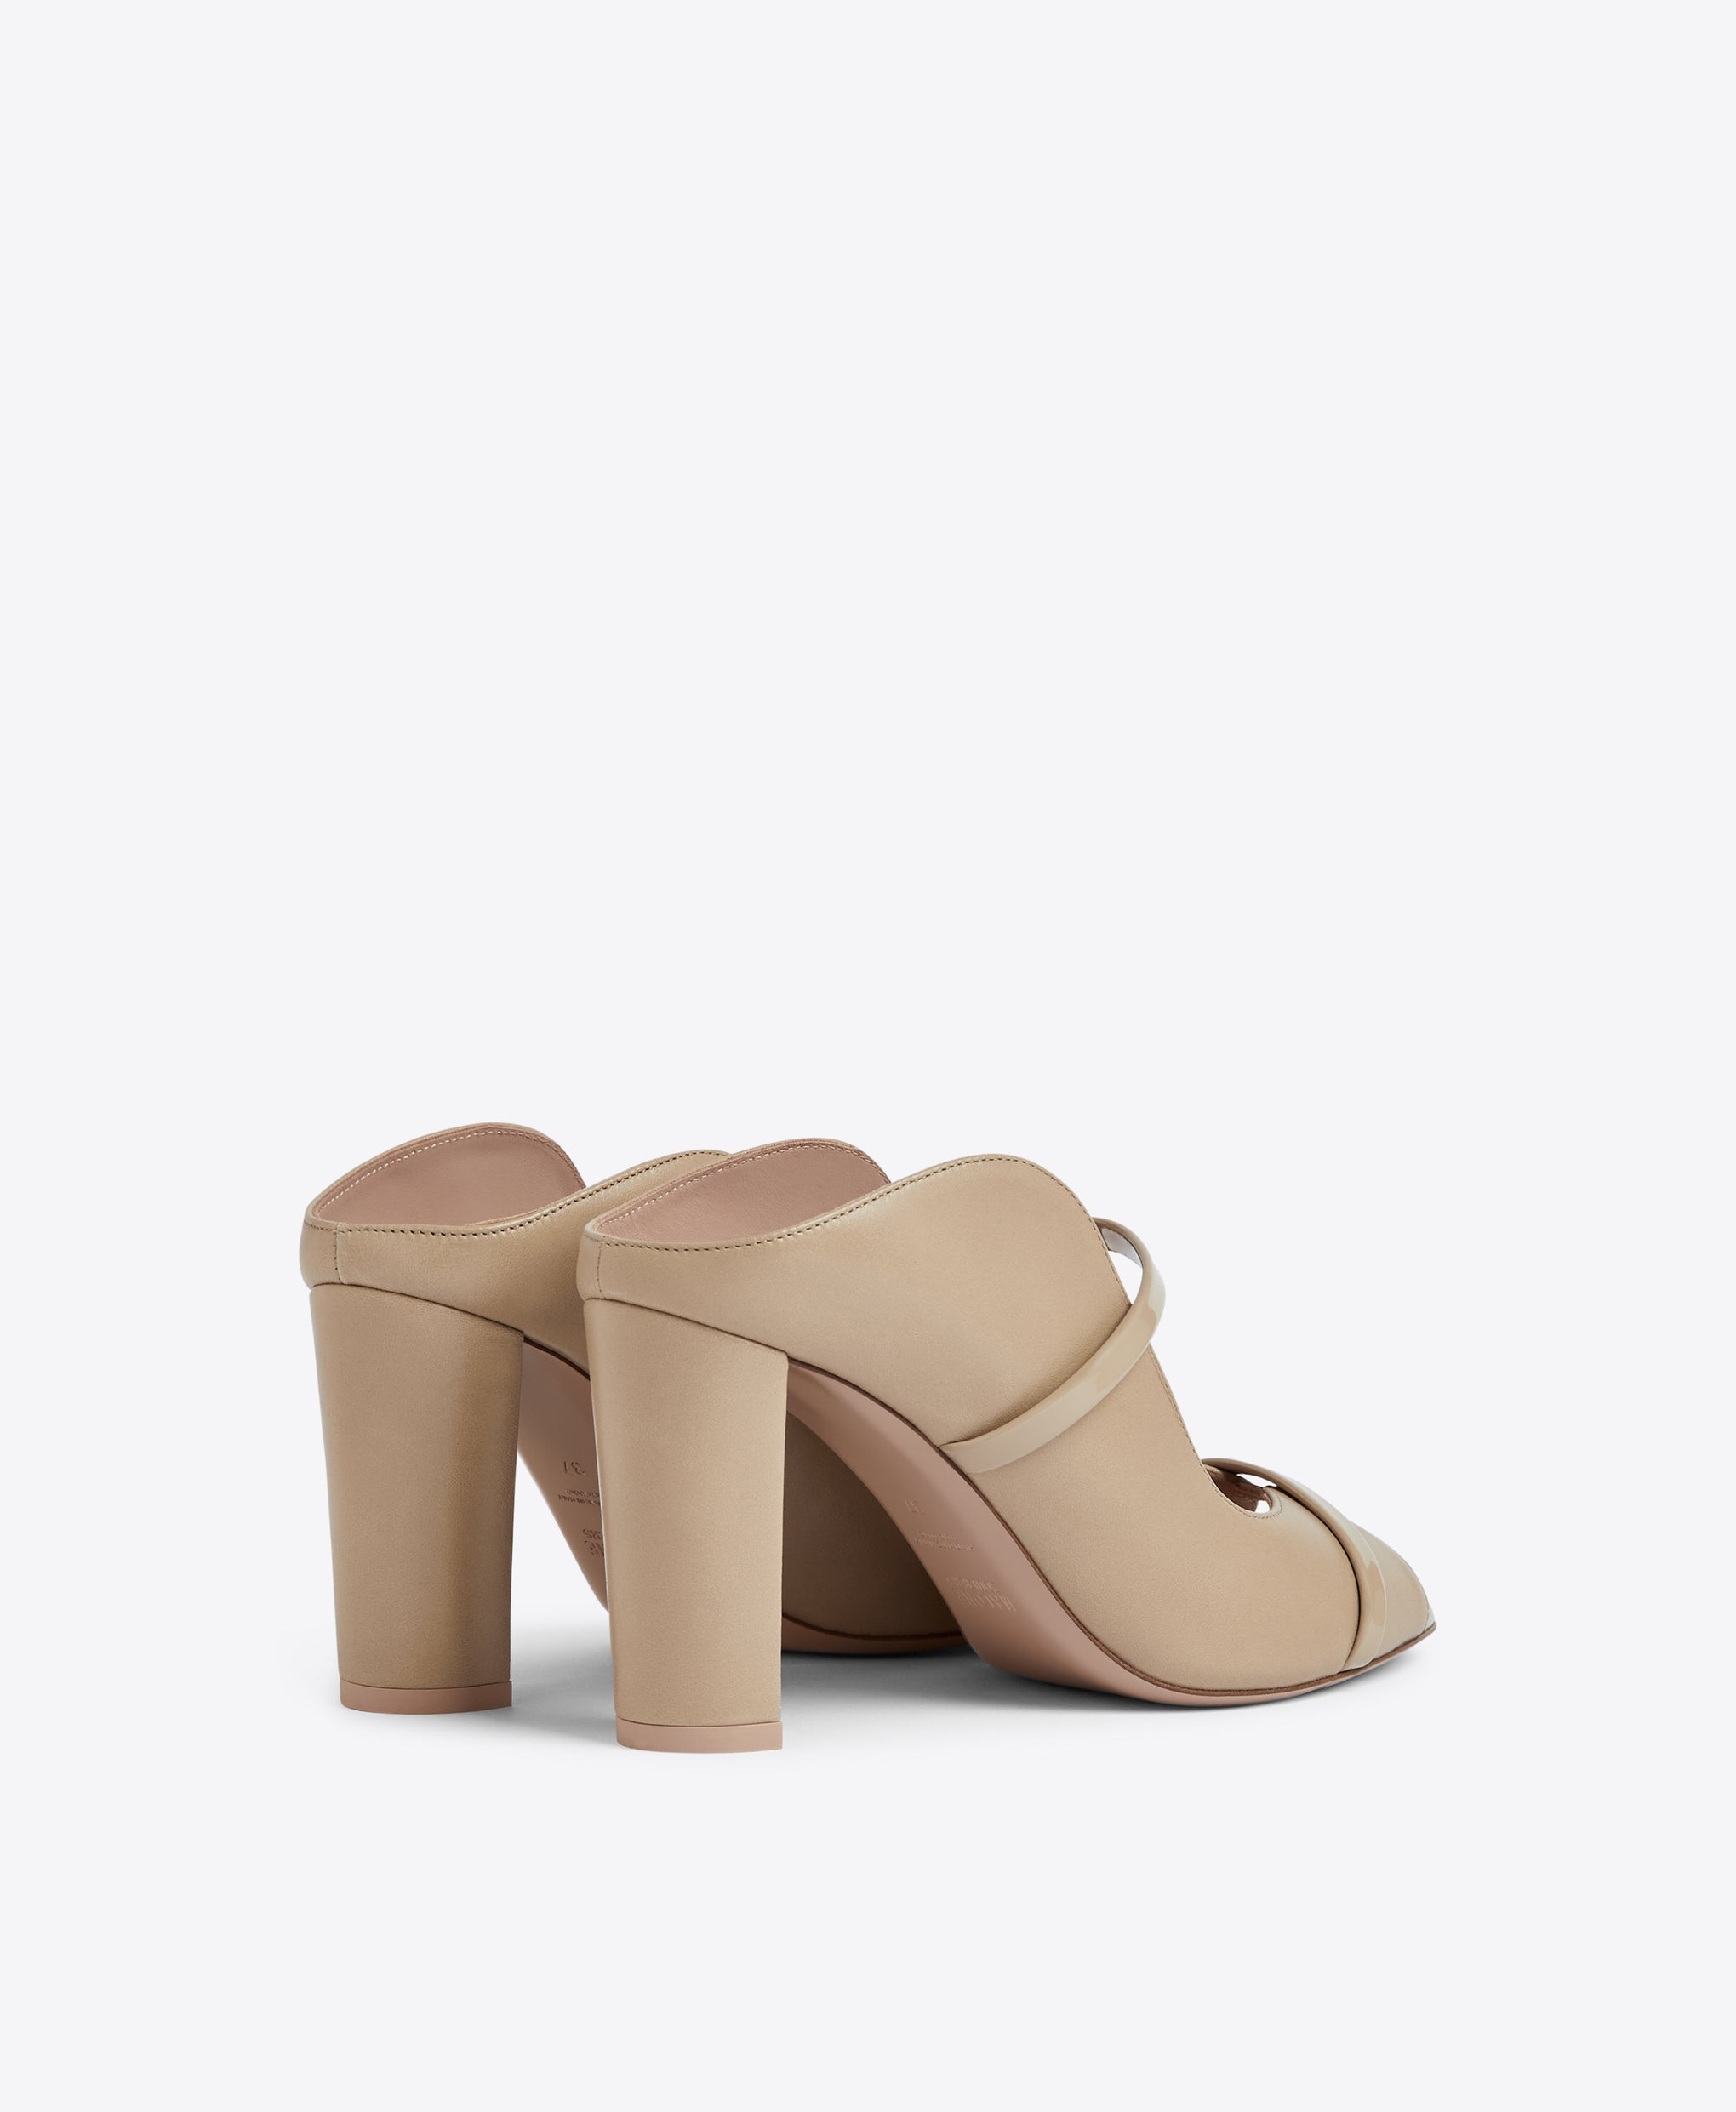 Malone Souliers Norah 85 Camel Leather Heeled Sandals